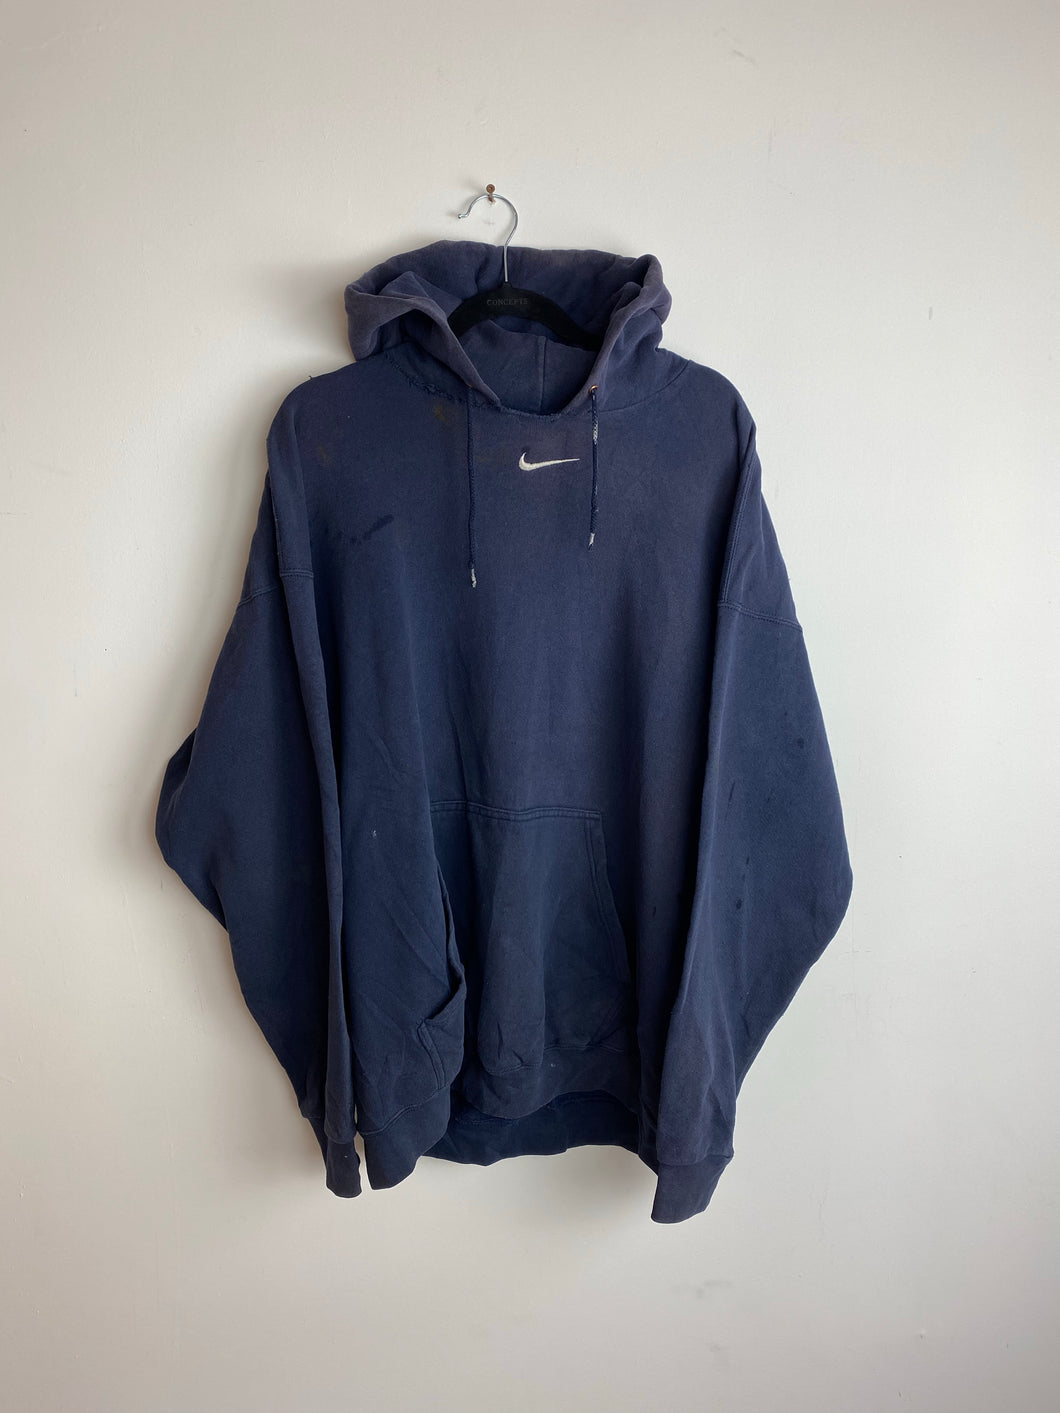 90s Middle check Nike hoodie